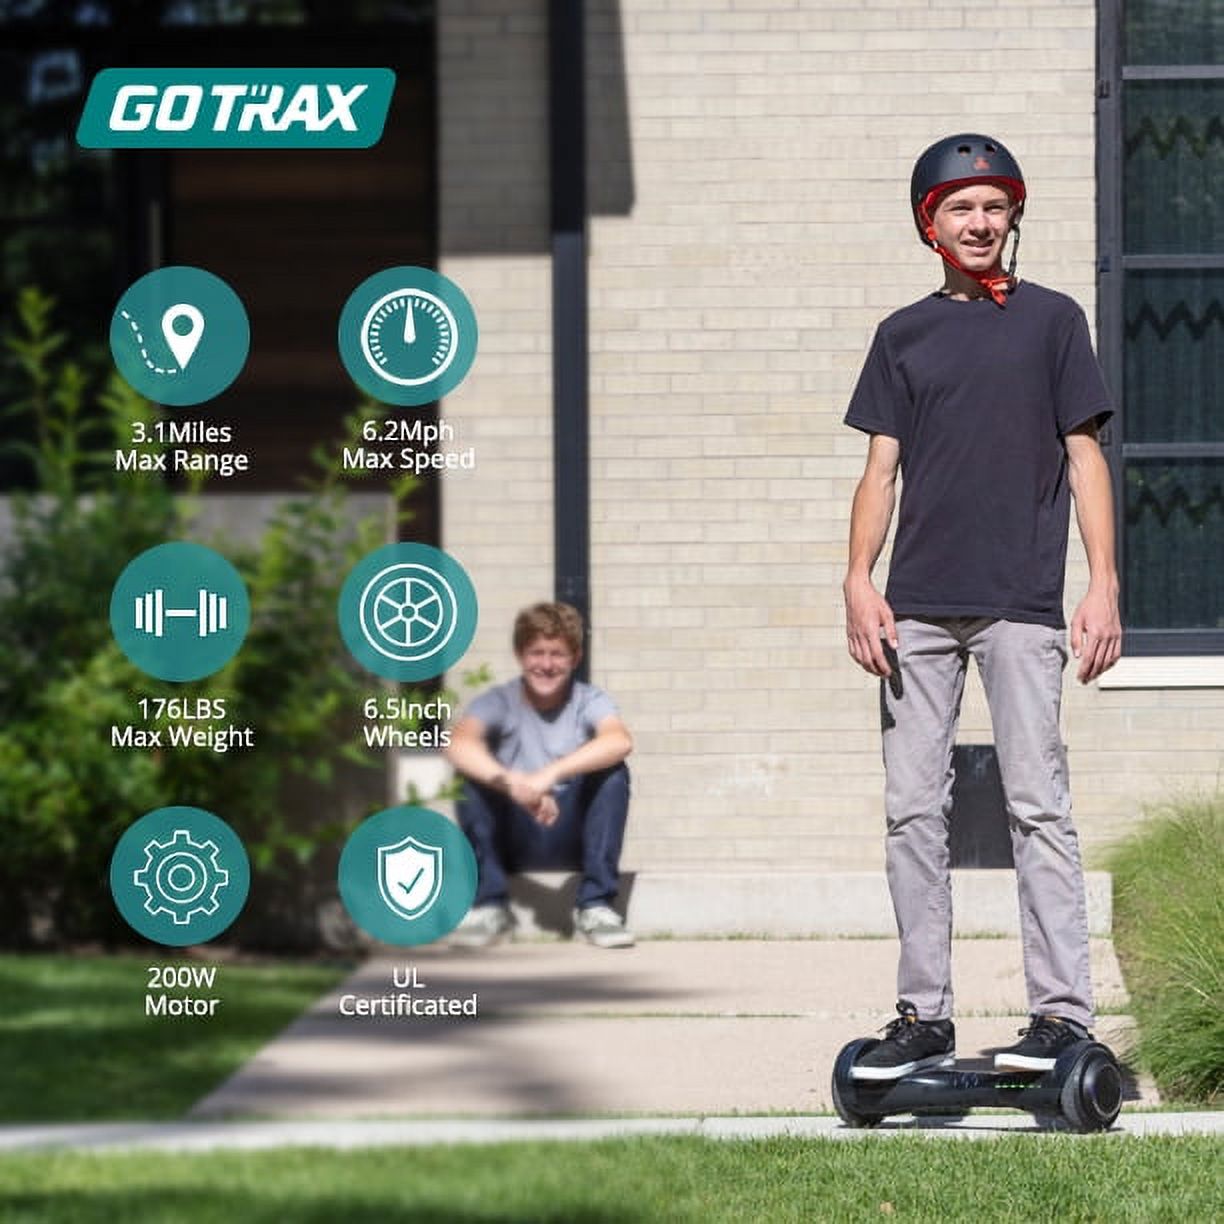 GOTRAX FX3 Hoverboard with 6.2 mph Max Speed, Self Balancing Scooter for 44-176lbs Kids Adults Black - image 2 of 9